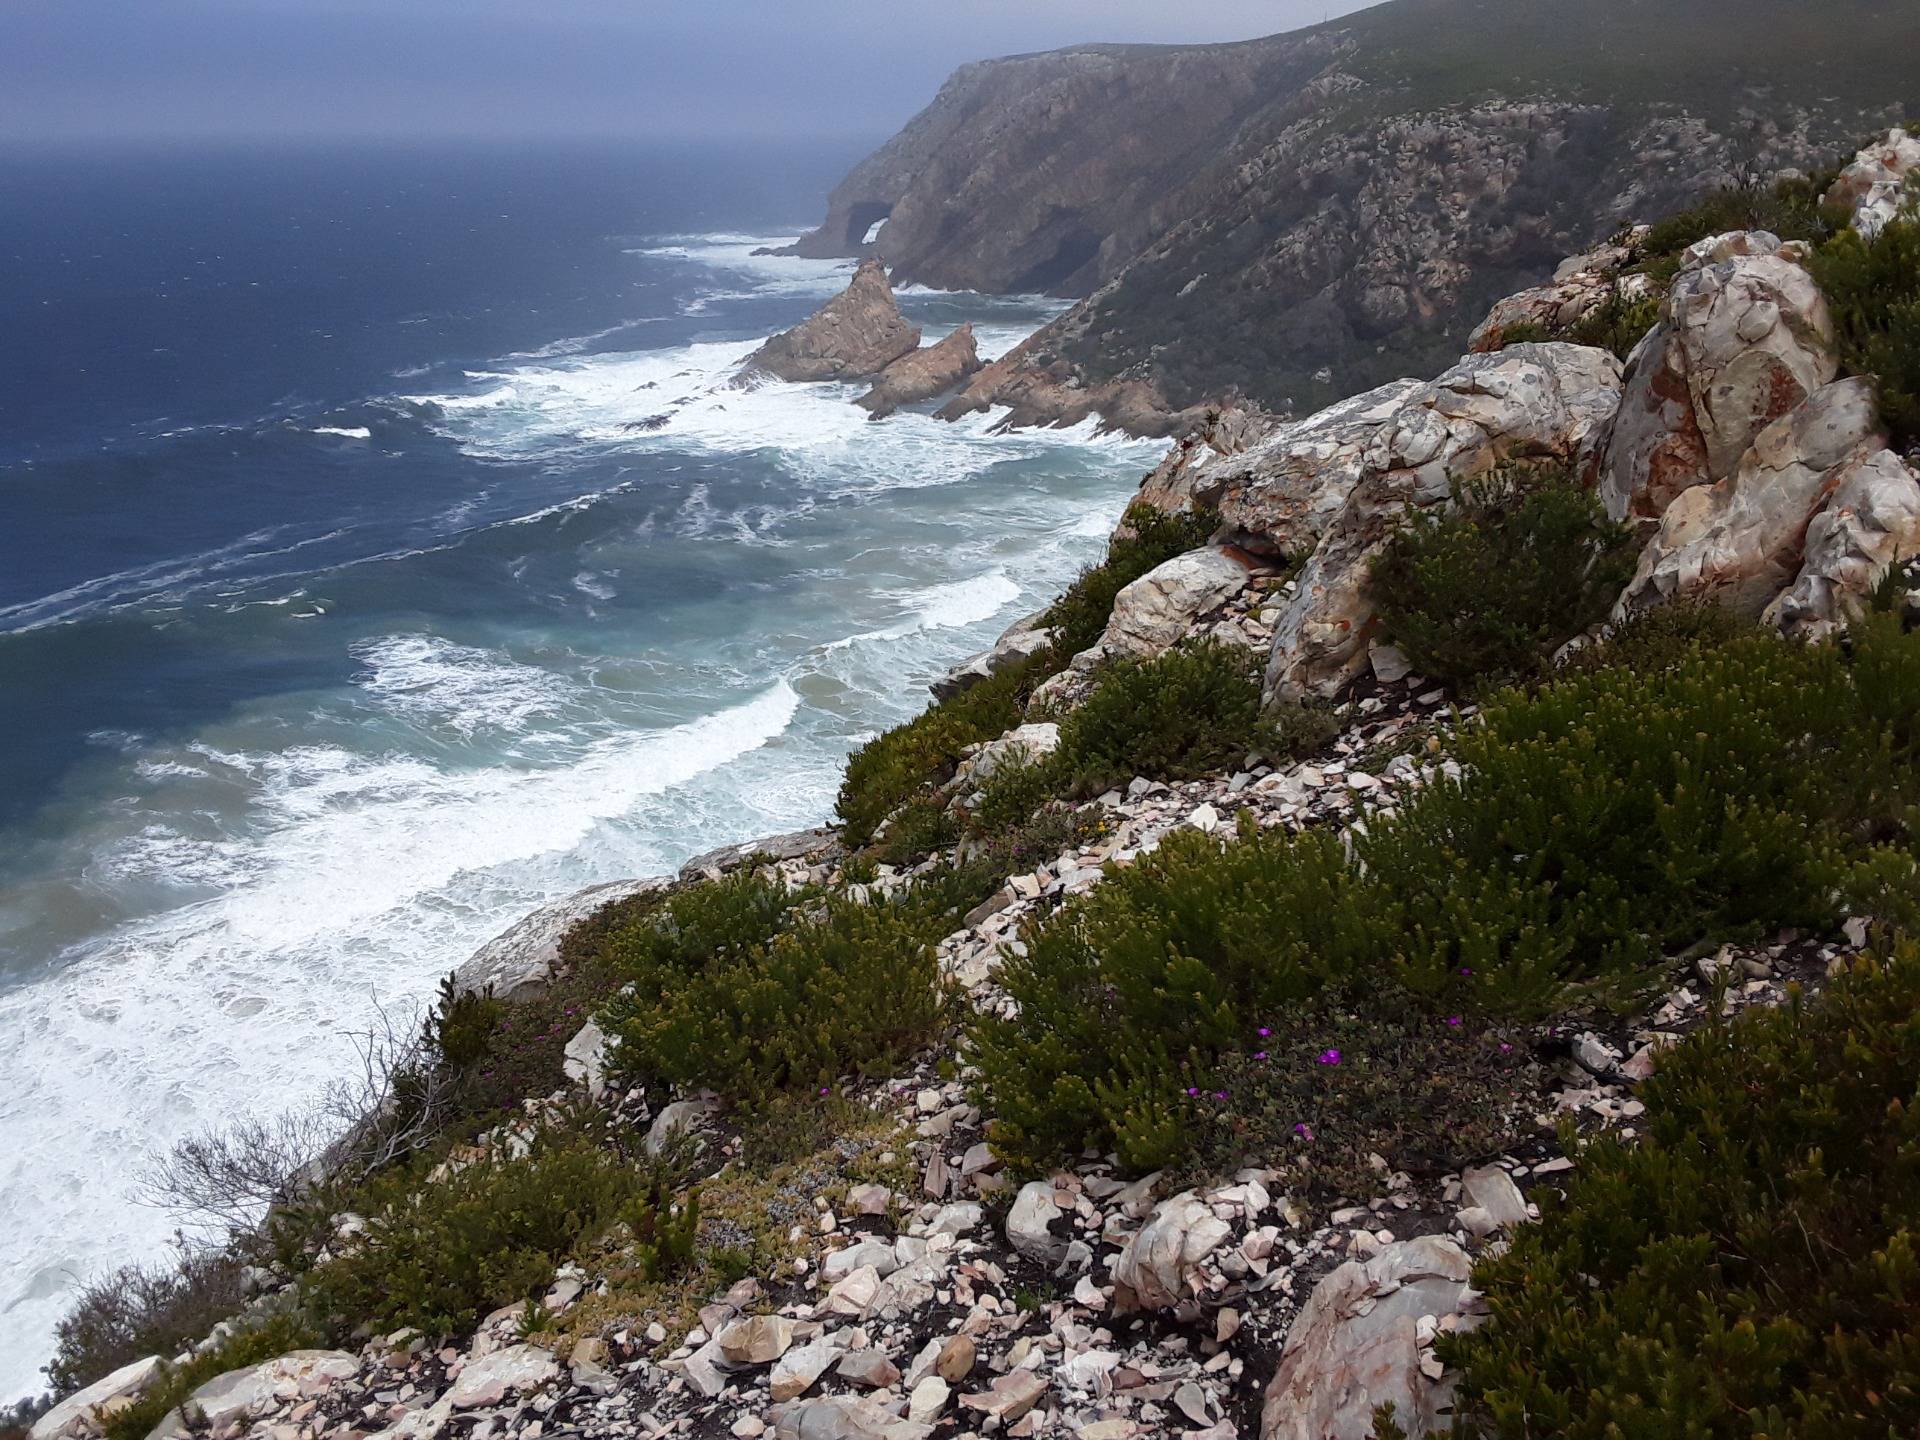 The caves of Captain Kidd on the shores of Cape south coast of Africa?